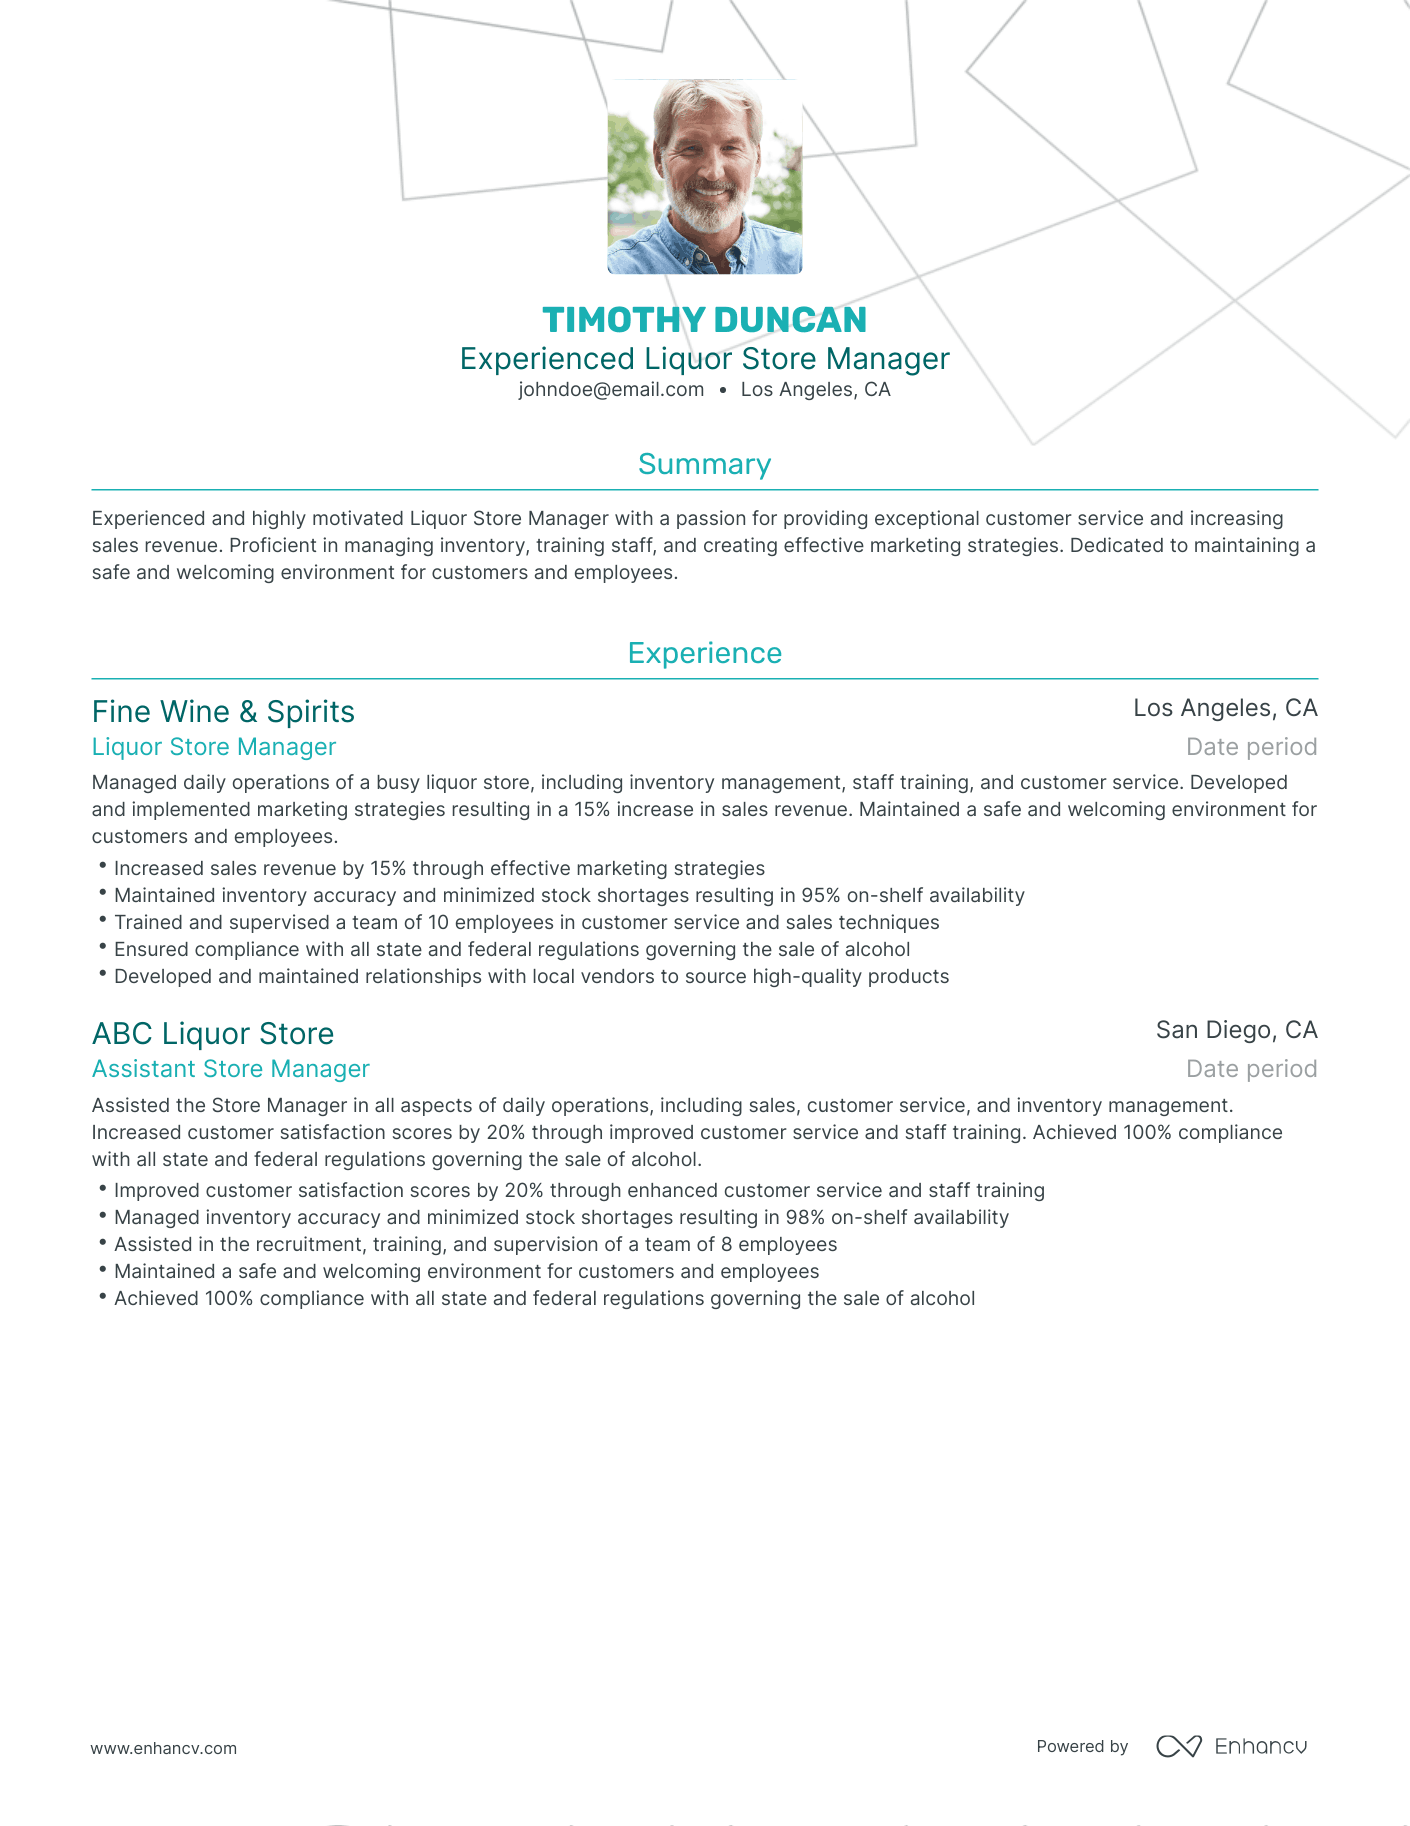 Traditional Liquor Store Manager Resume Template